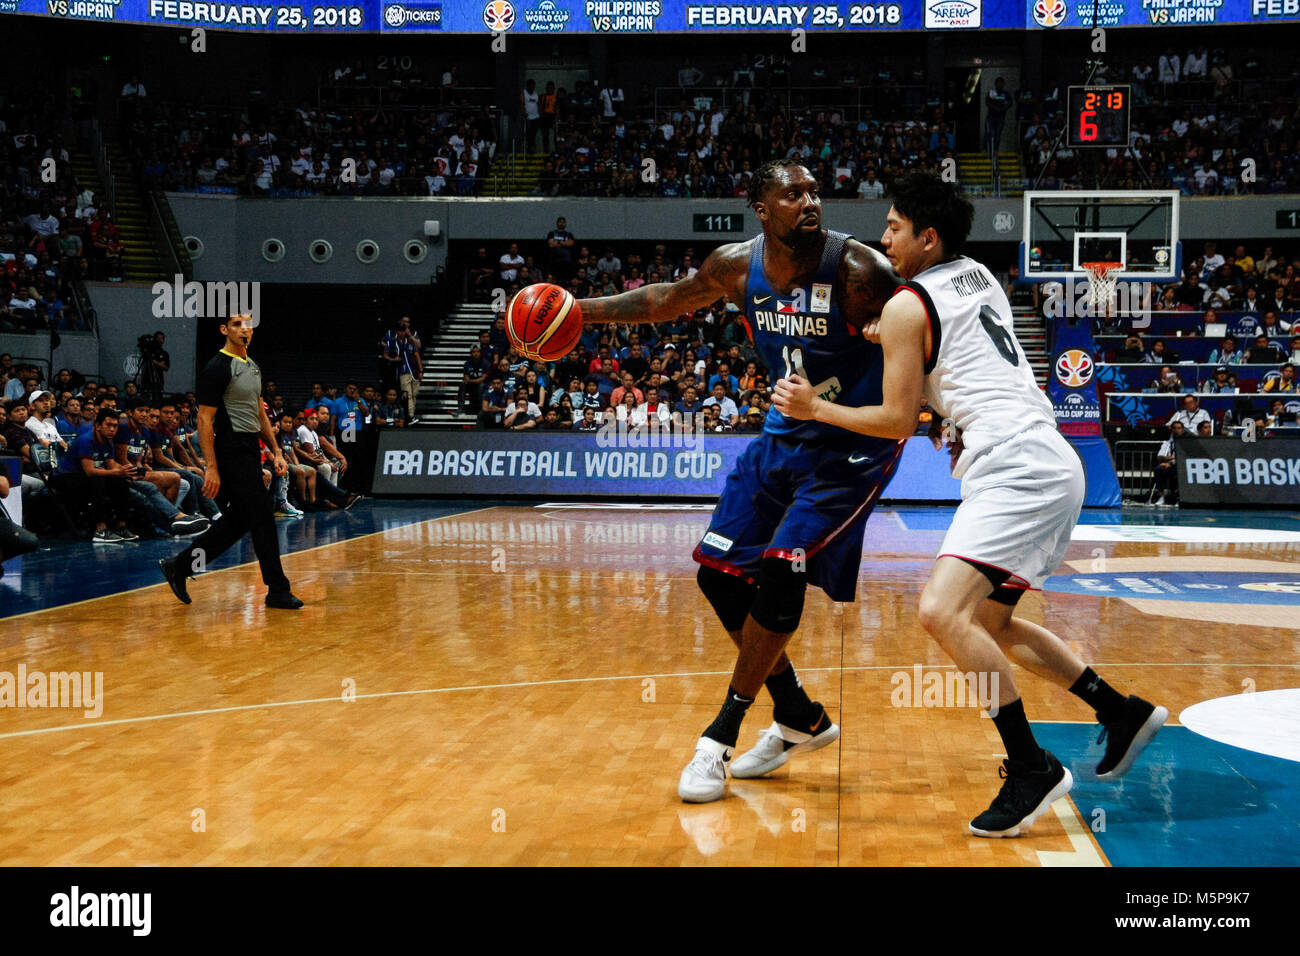 Philippines. 25th Feb, 2018. Makoto Hiejima (6) guards against Andray Blatche (11) during the qualifying game at the MOA Arena. The Philippine and Japanese basketball team met at the hardcourt of the Mall of Asia Arena in Pasay City, for the FIBA World Cup 2019 Asian Qualifiers. The Philippines won over Japan, 89-84. Credit: J Gerard Seguia/ZUMA Wire/Alamy Live News Stock Photo